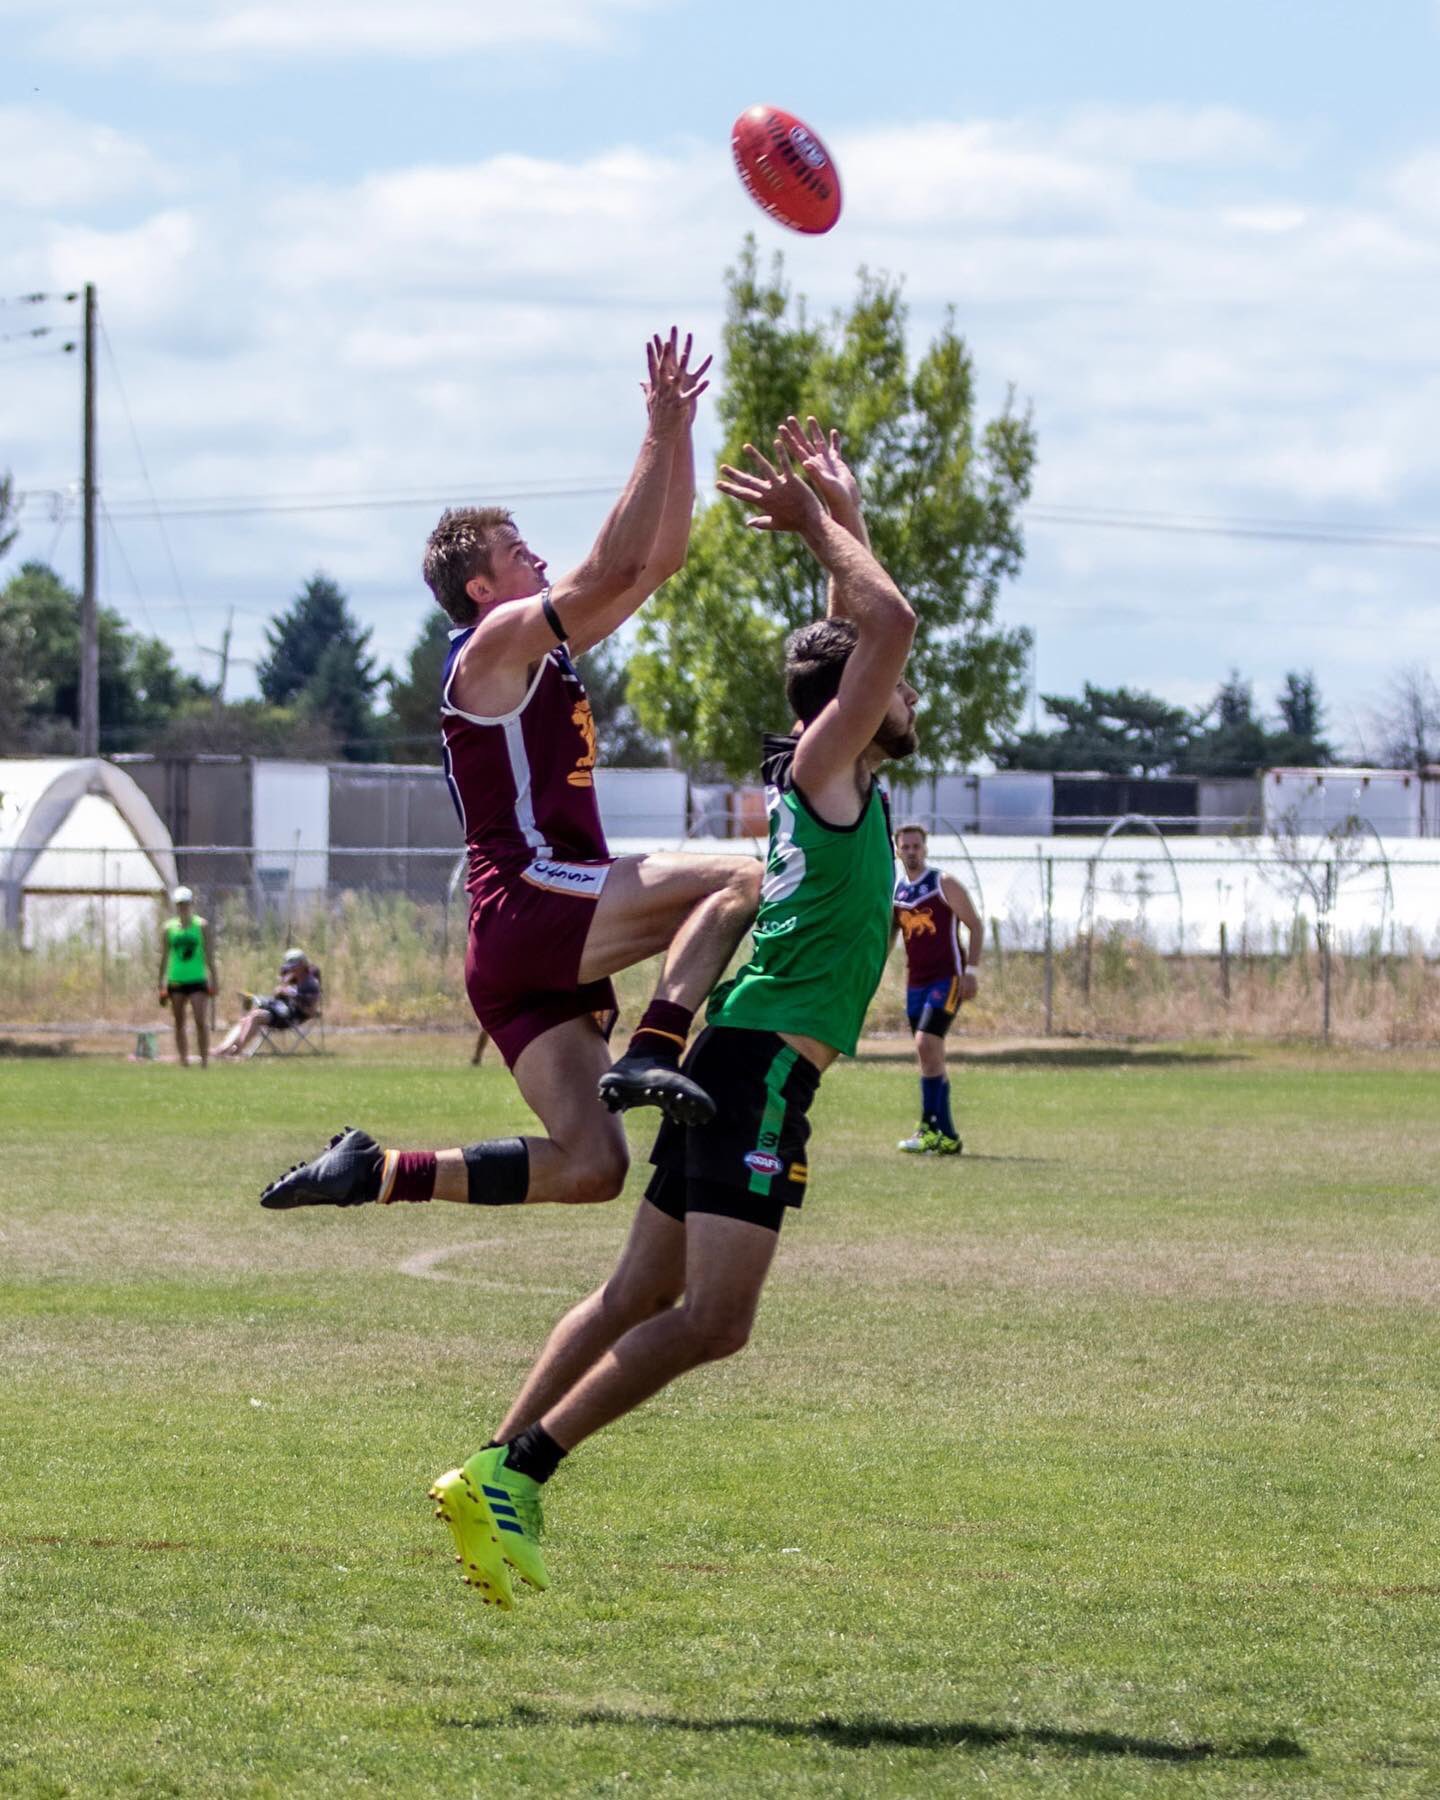 USAFL Twitter: "Hi Everyone! Welcome to Australian Rules Football! a team in the USA you: 👉🏻 https://t.co/WVbm8zZaSM Get own football and AFL merch: 👉🏻 https://t.co/MEm231NajX Watch full games: